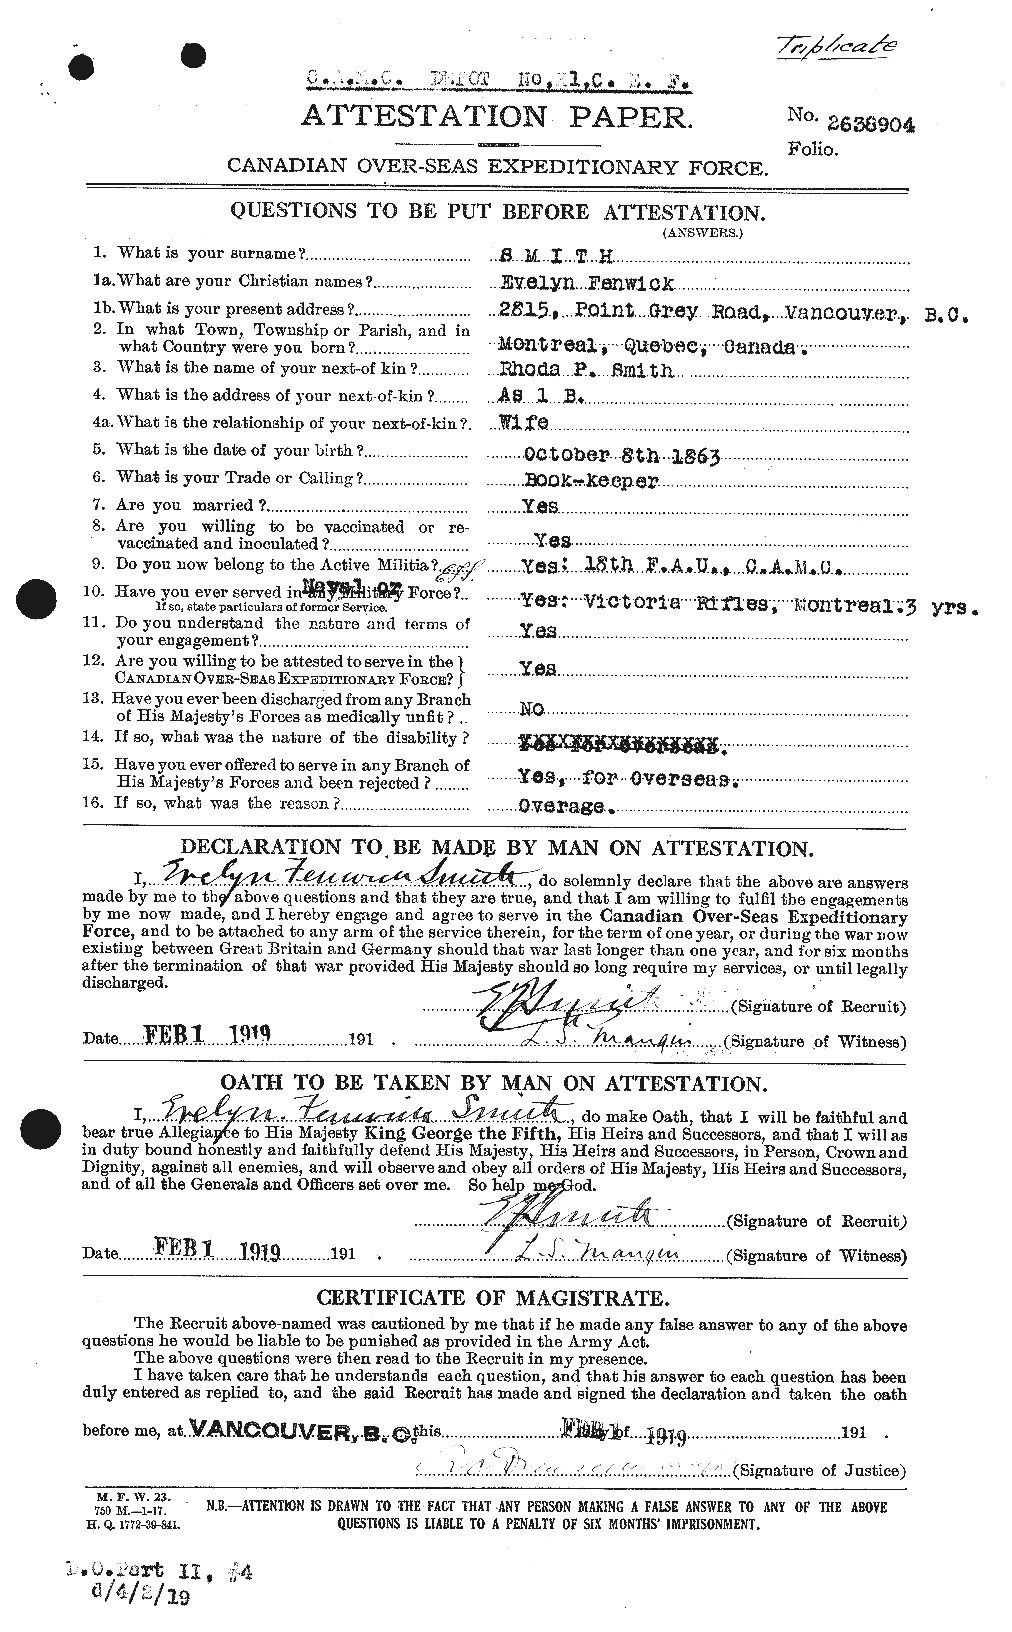 Personnel Records of the First World War - CEF 621240a